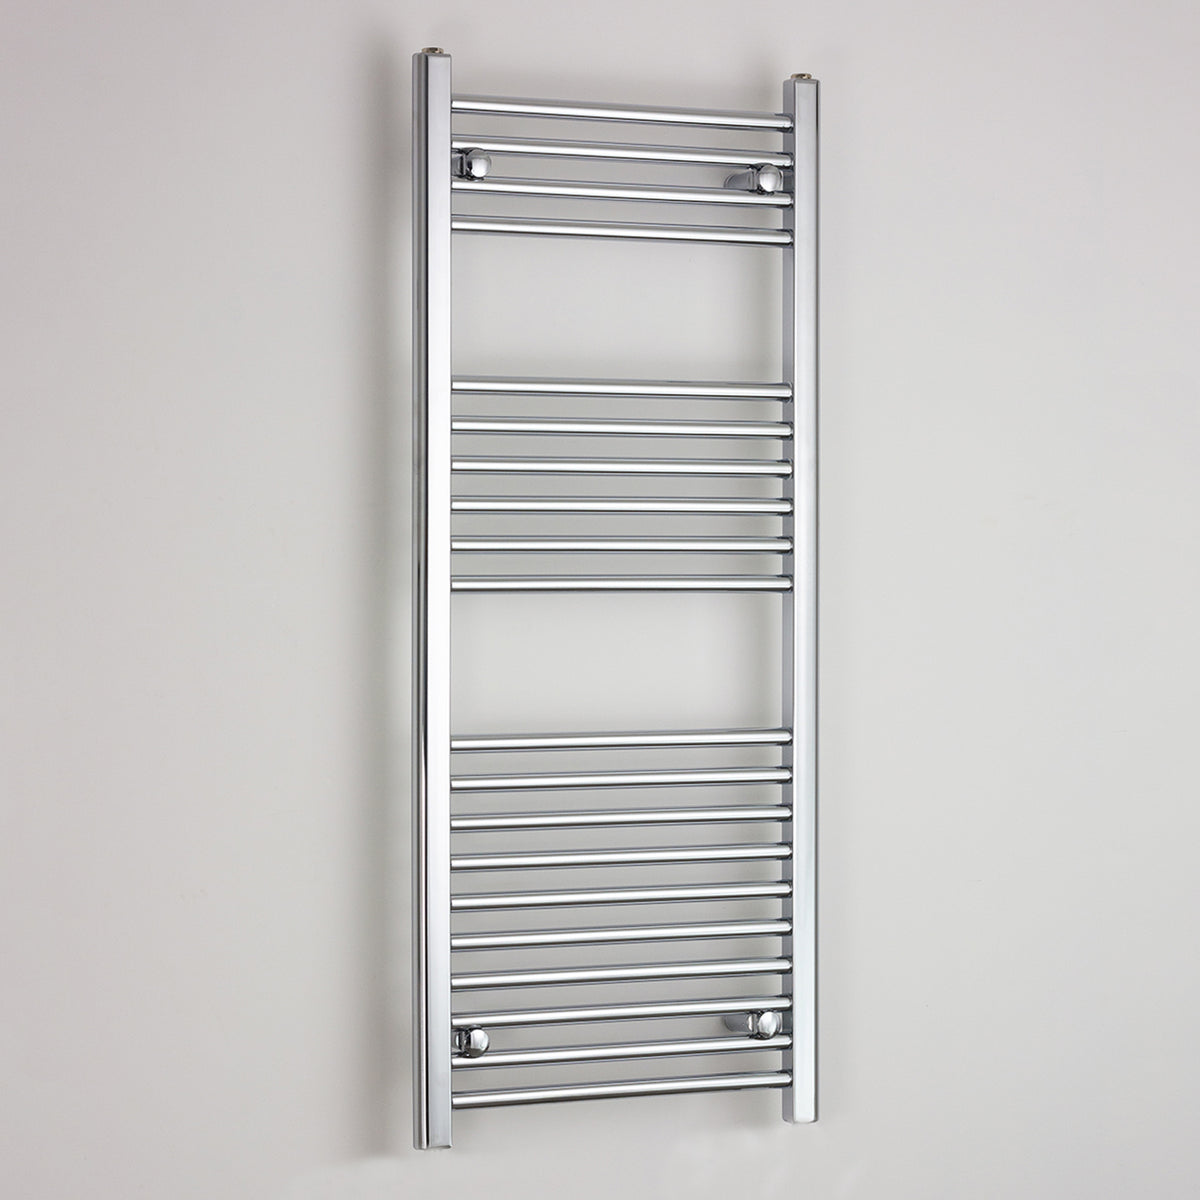 1200 mm High x 600 mm Heated or Curved Rail